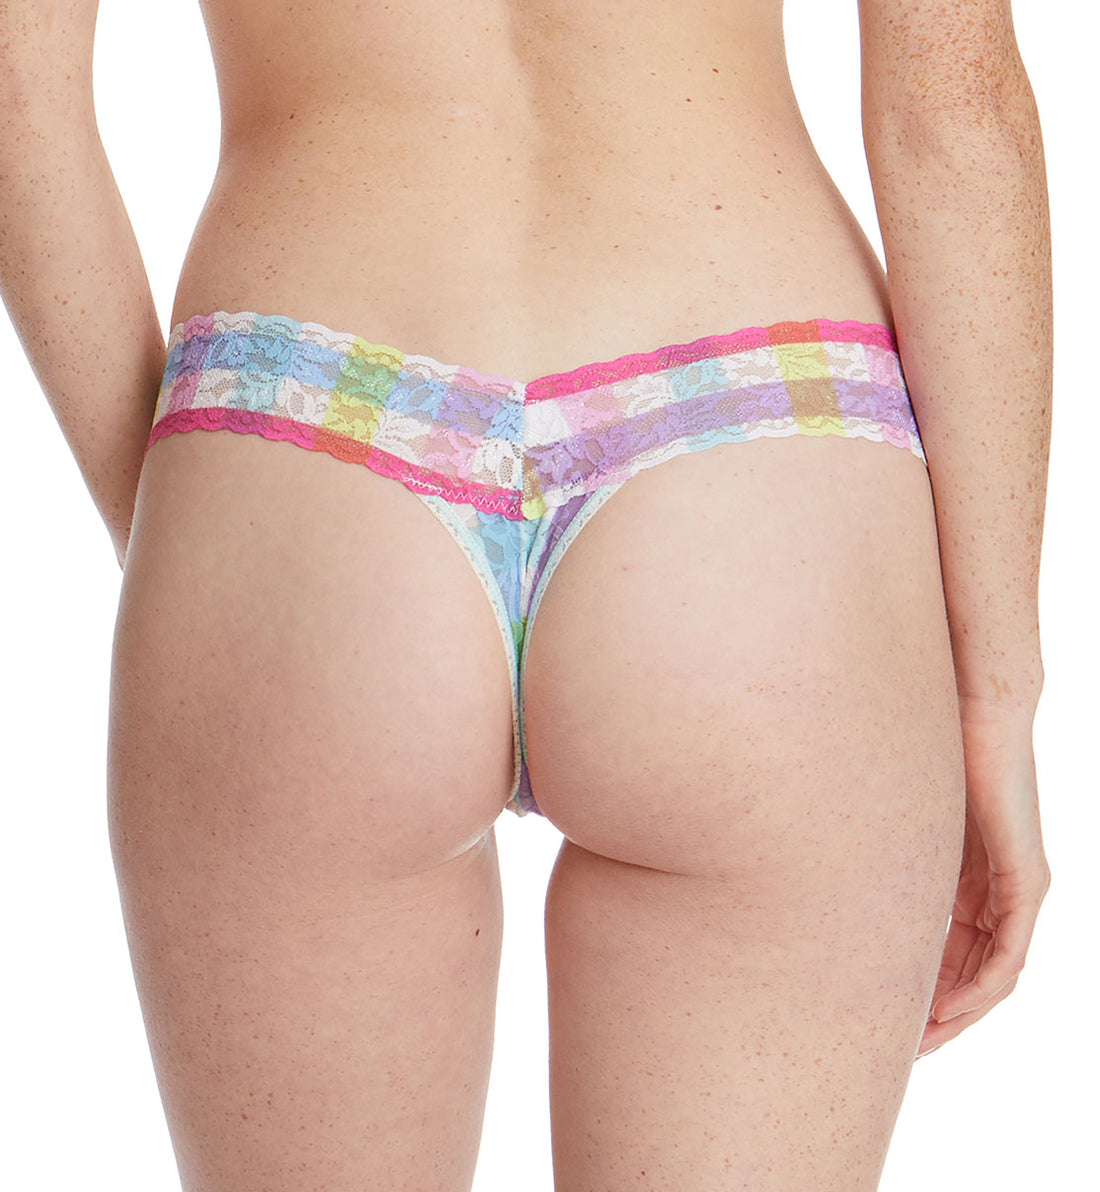 Hanky Panky Signature Lace Printed Low Rise Thong (PR4911P),Cheery Check - Cheery Check,One Size